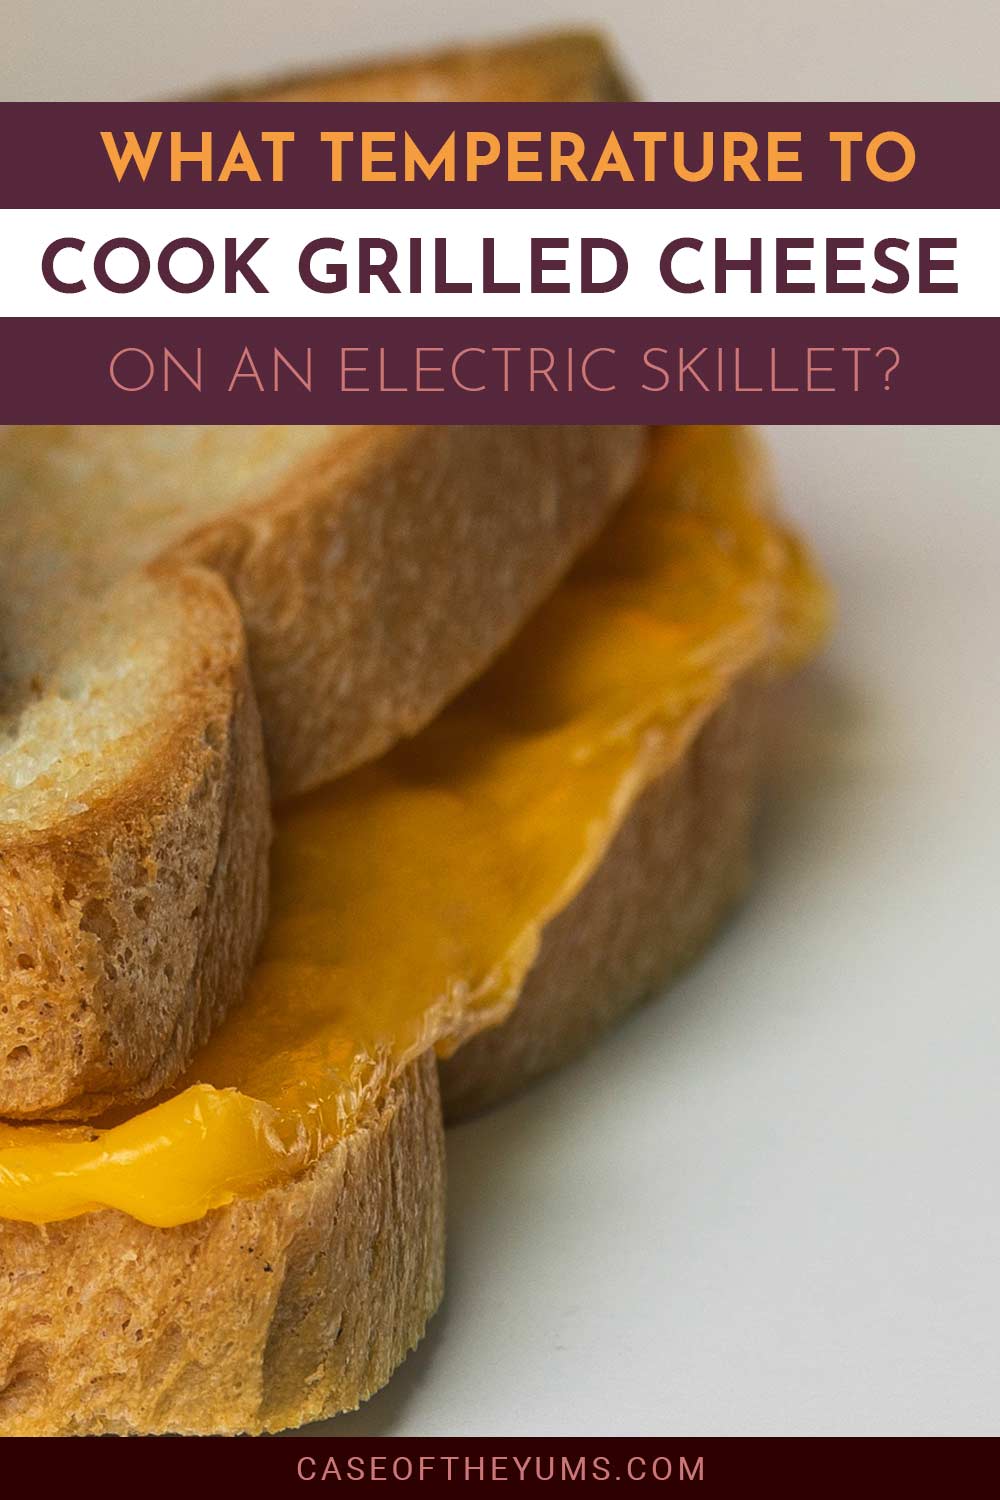 Cheese in 2 slices of bread - What Temperature To Cook Grilled Cheese On An Electric Skillet?